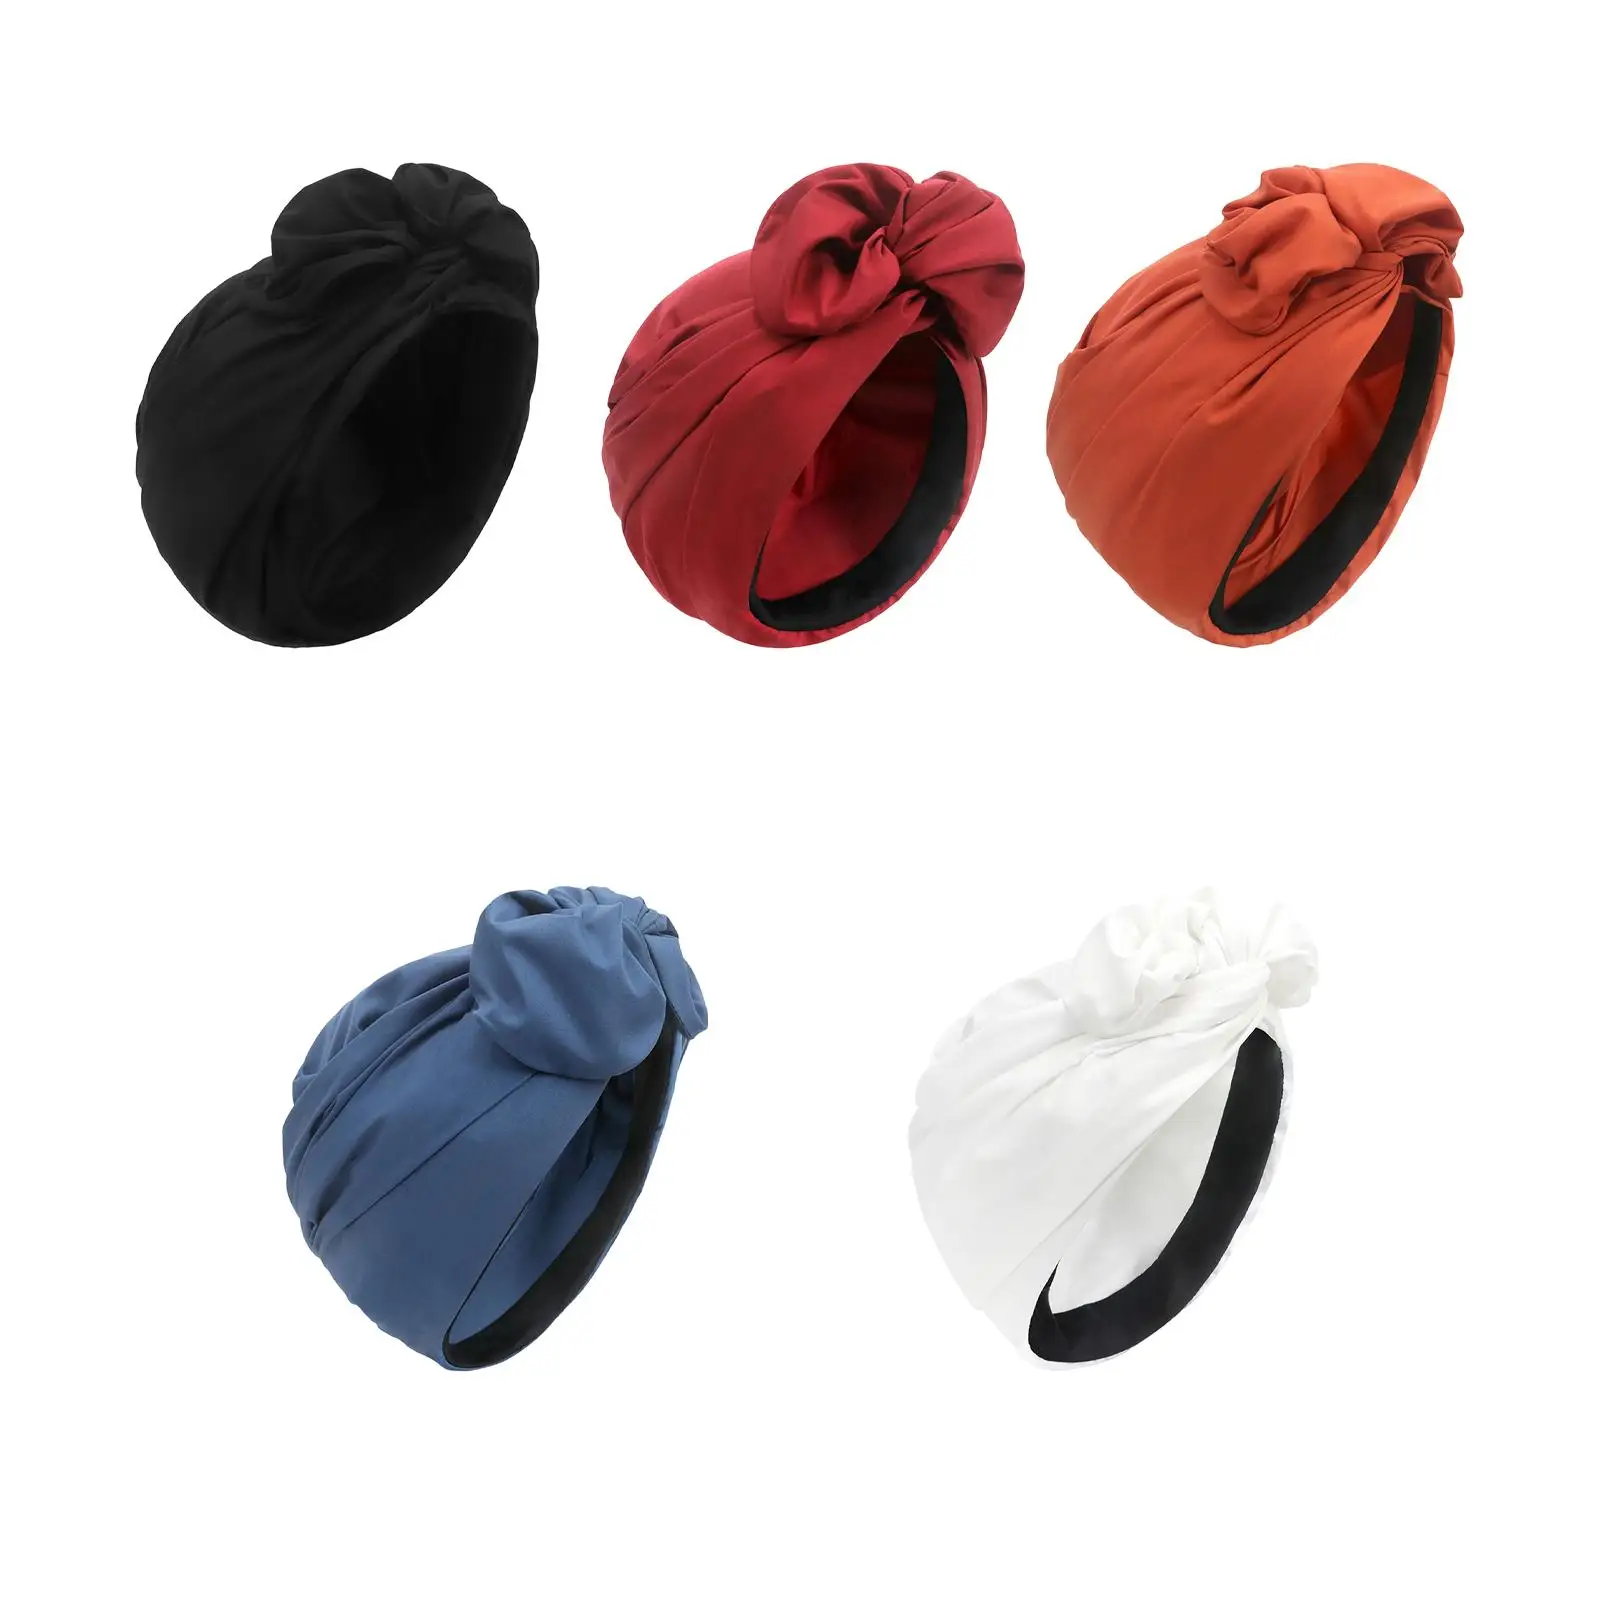 

Woman Head Turban Hat Knot Bonnet Caps Universal Pre Tied one size for most Women Stylish Multifunction Hair Cover Accessory